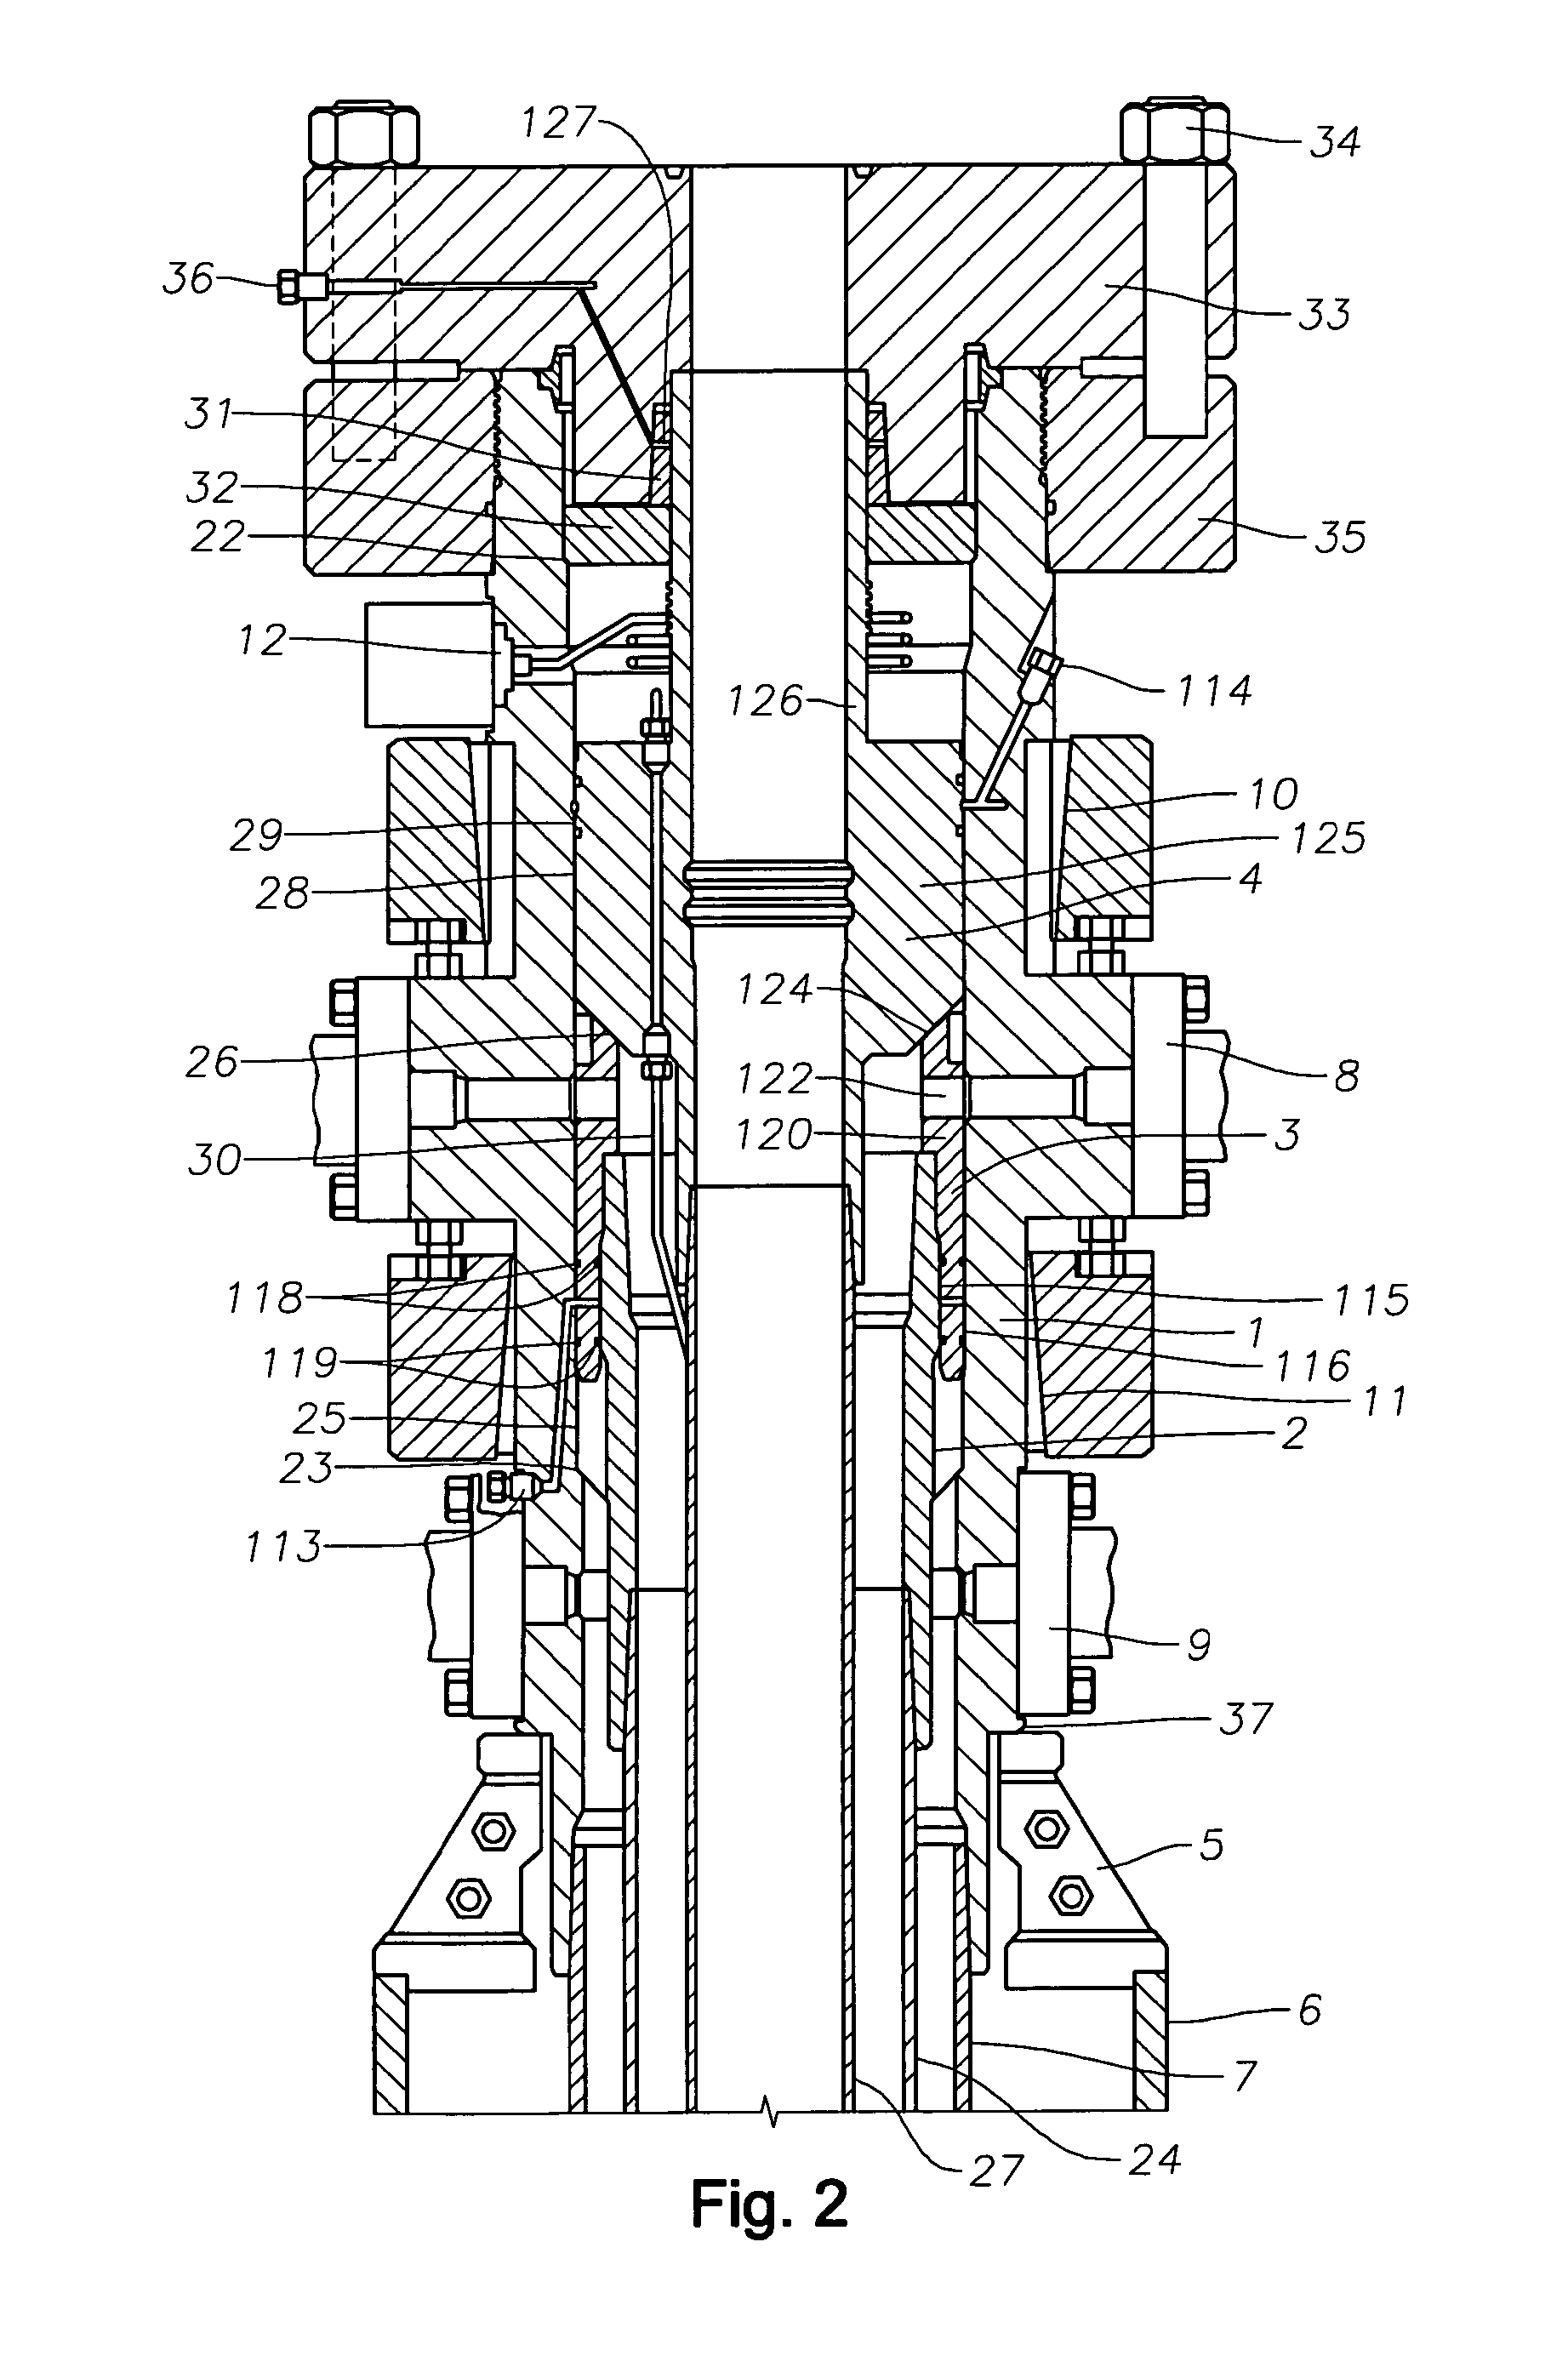 Externally activated seal system for wellhead